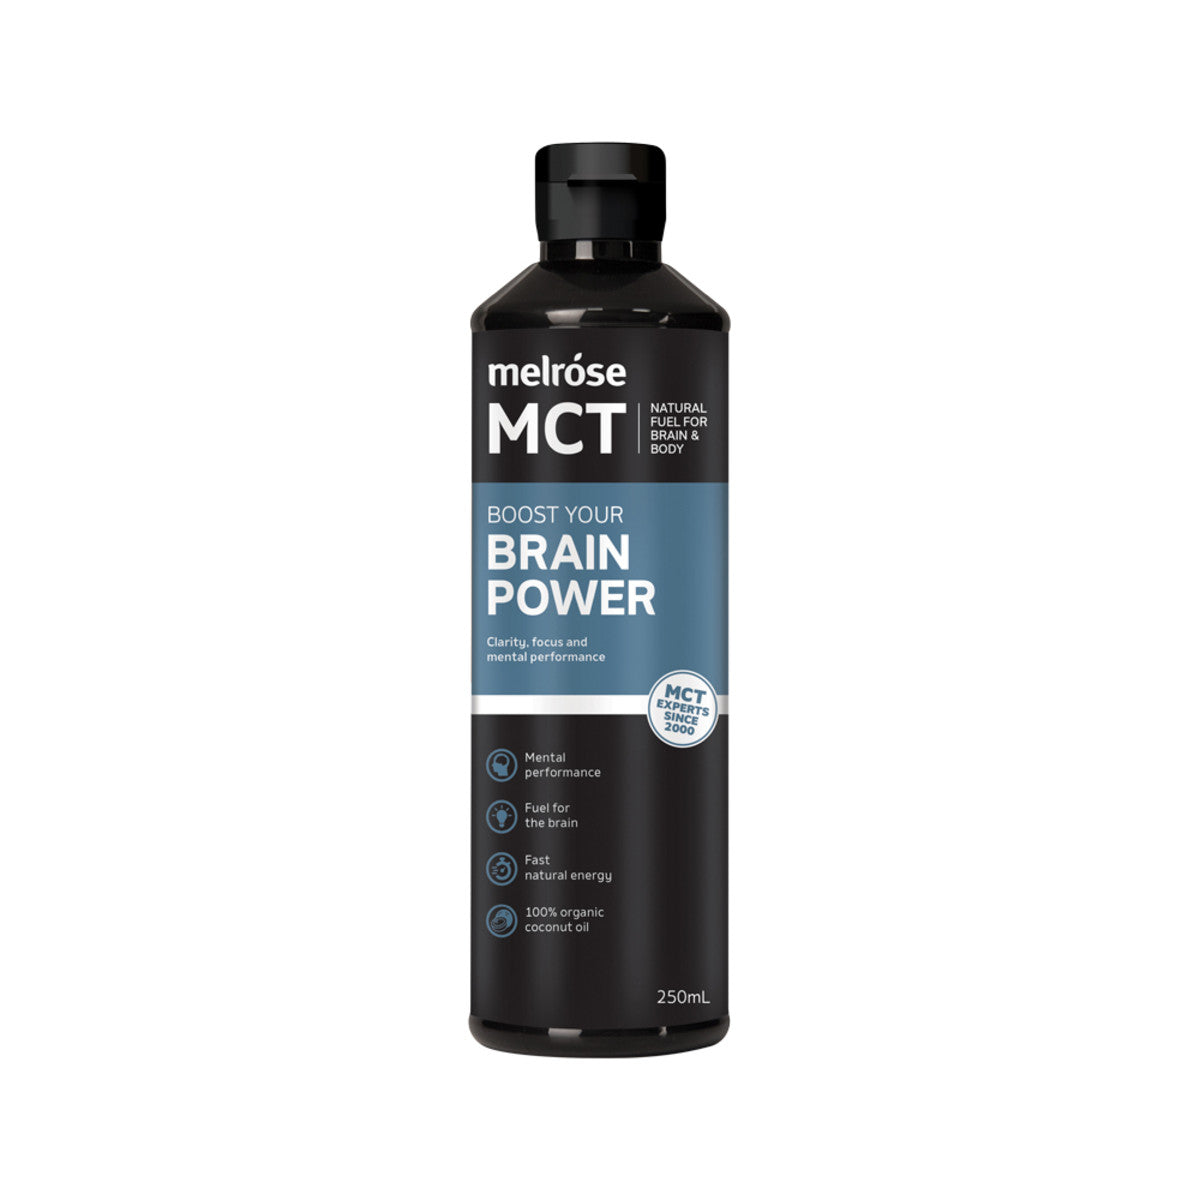 Melrose MCT Oil Boost Your Brain Power 250ml-The Living Co.